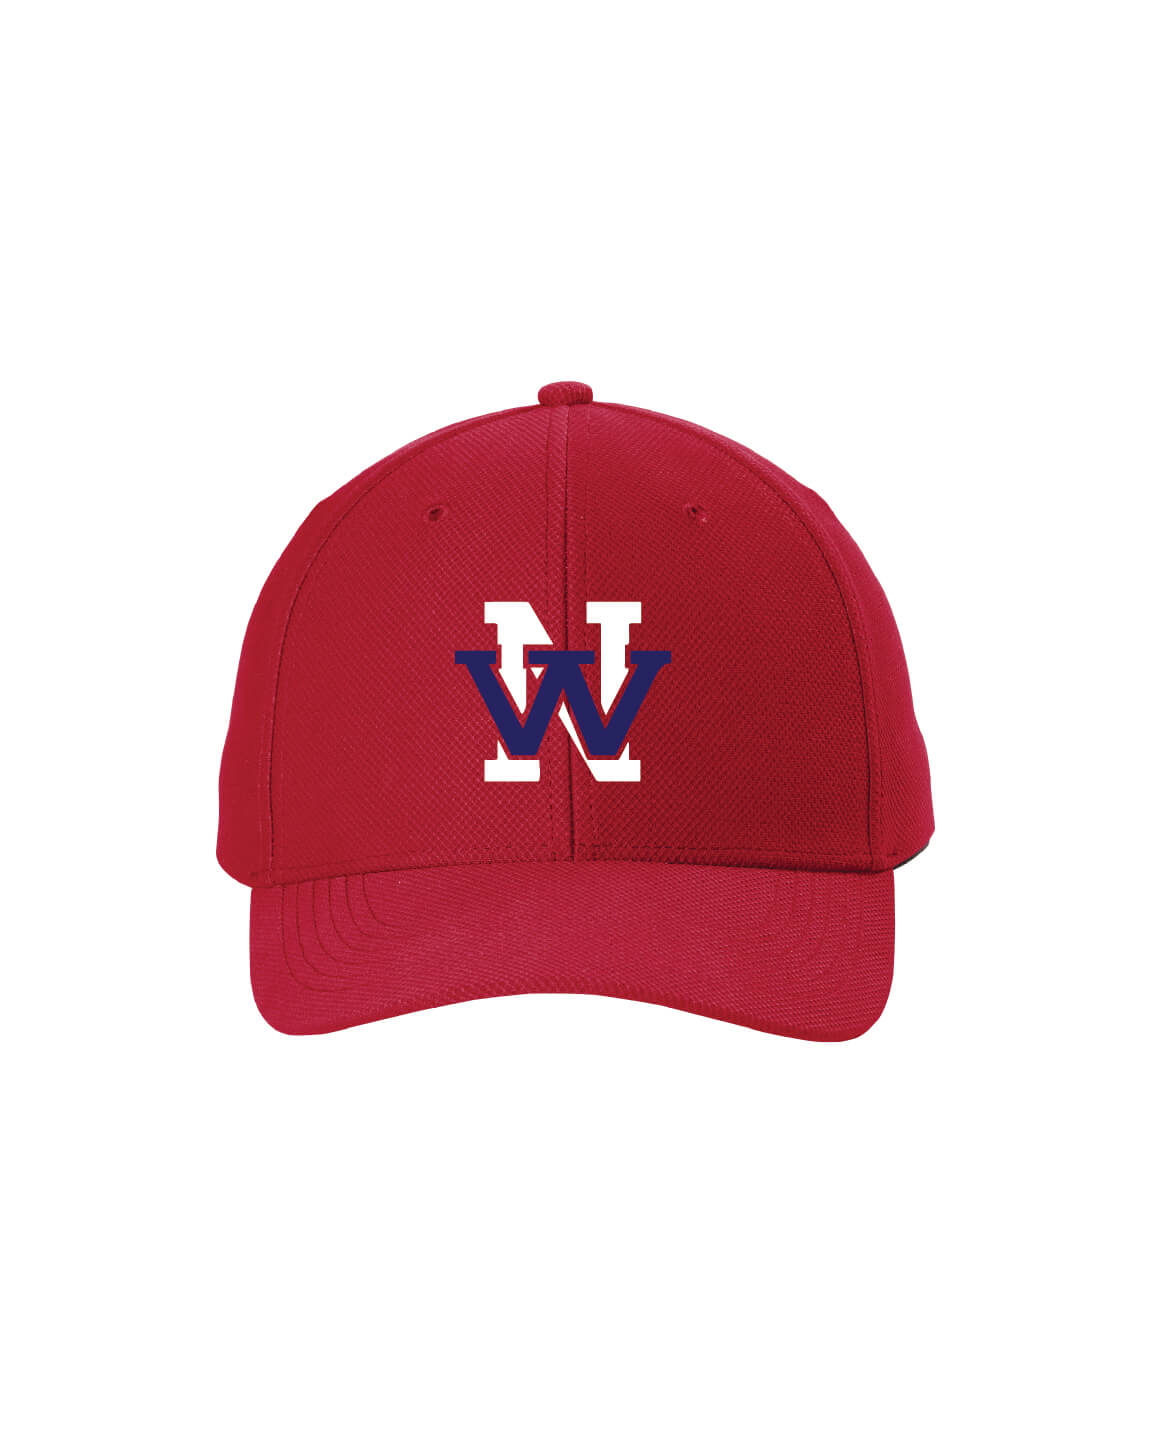 NW Ball Cap red